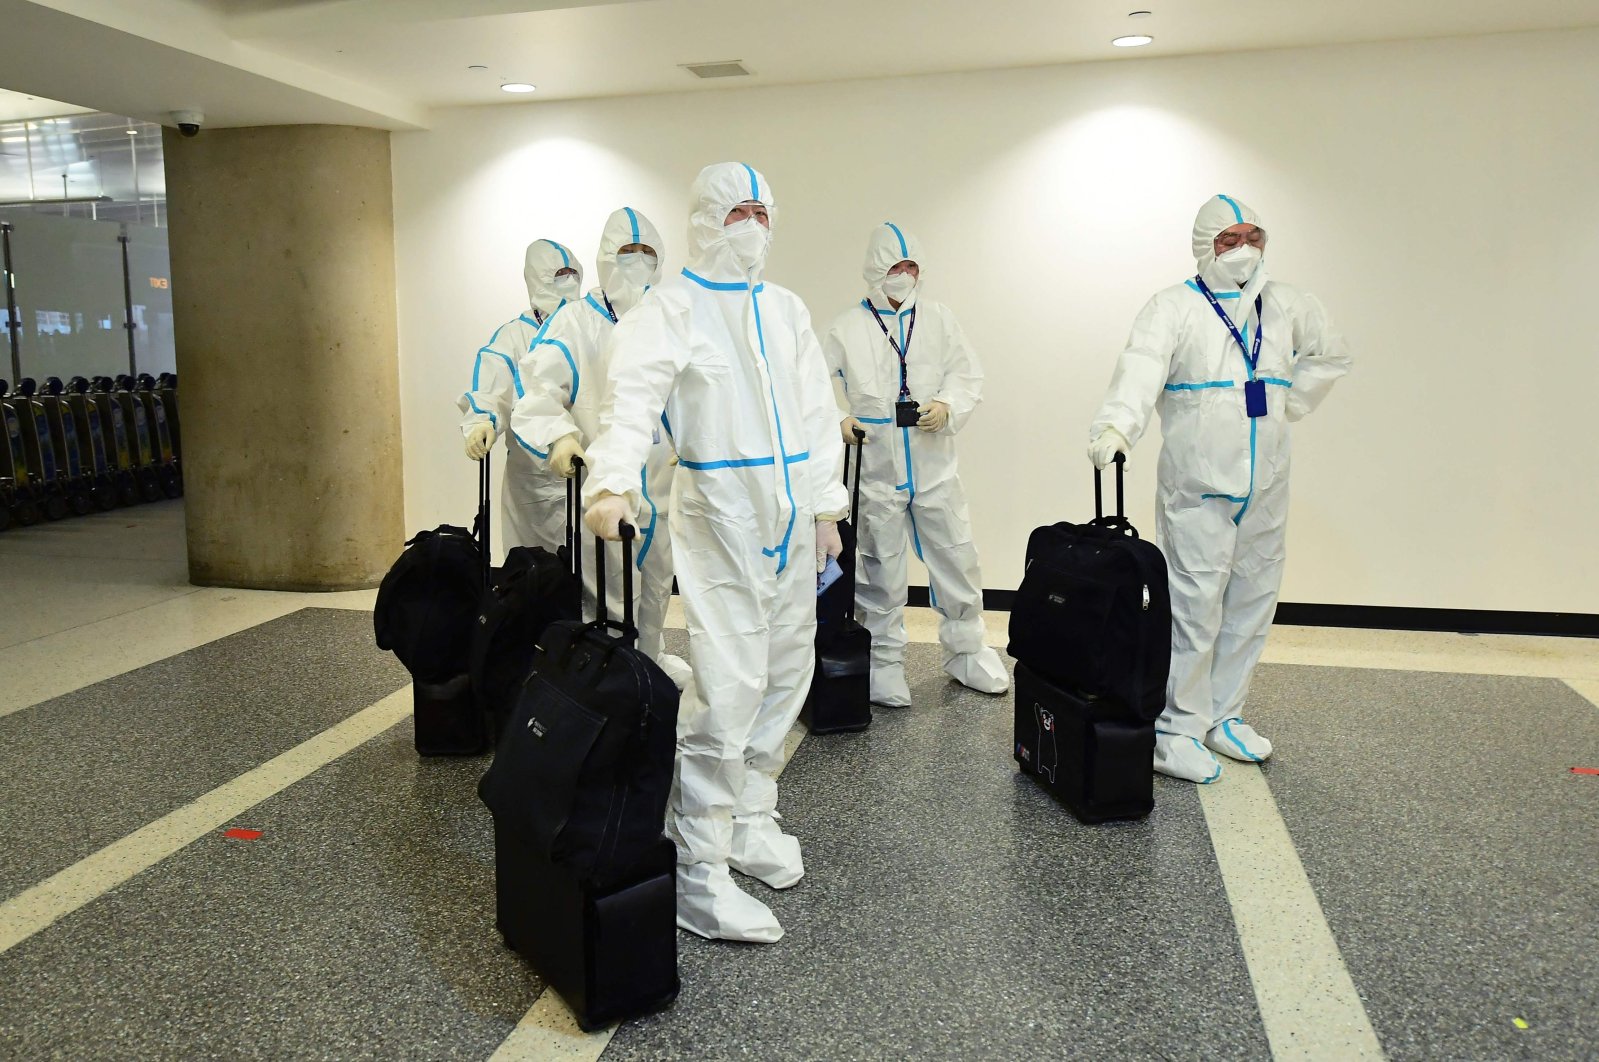 A flight crew from Air China arrives in hazmat suits in the international terminal at Los Angeles International Airport, in Los Angeles, U.S., Dec. 3, 2021. (AFP Photo)